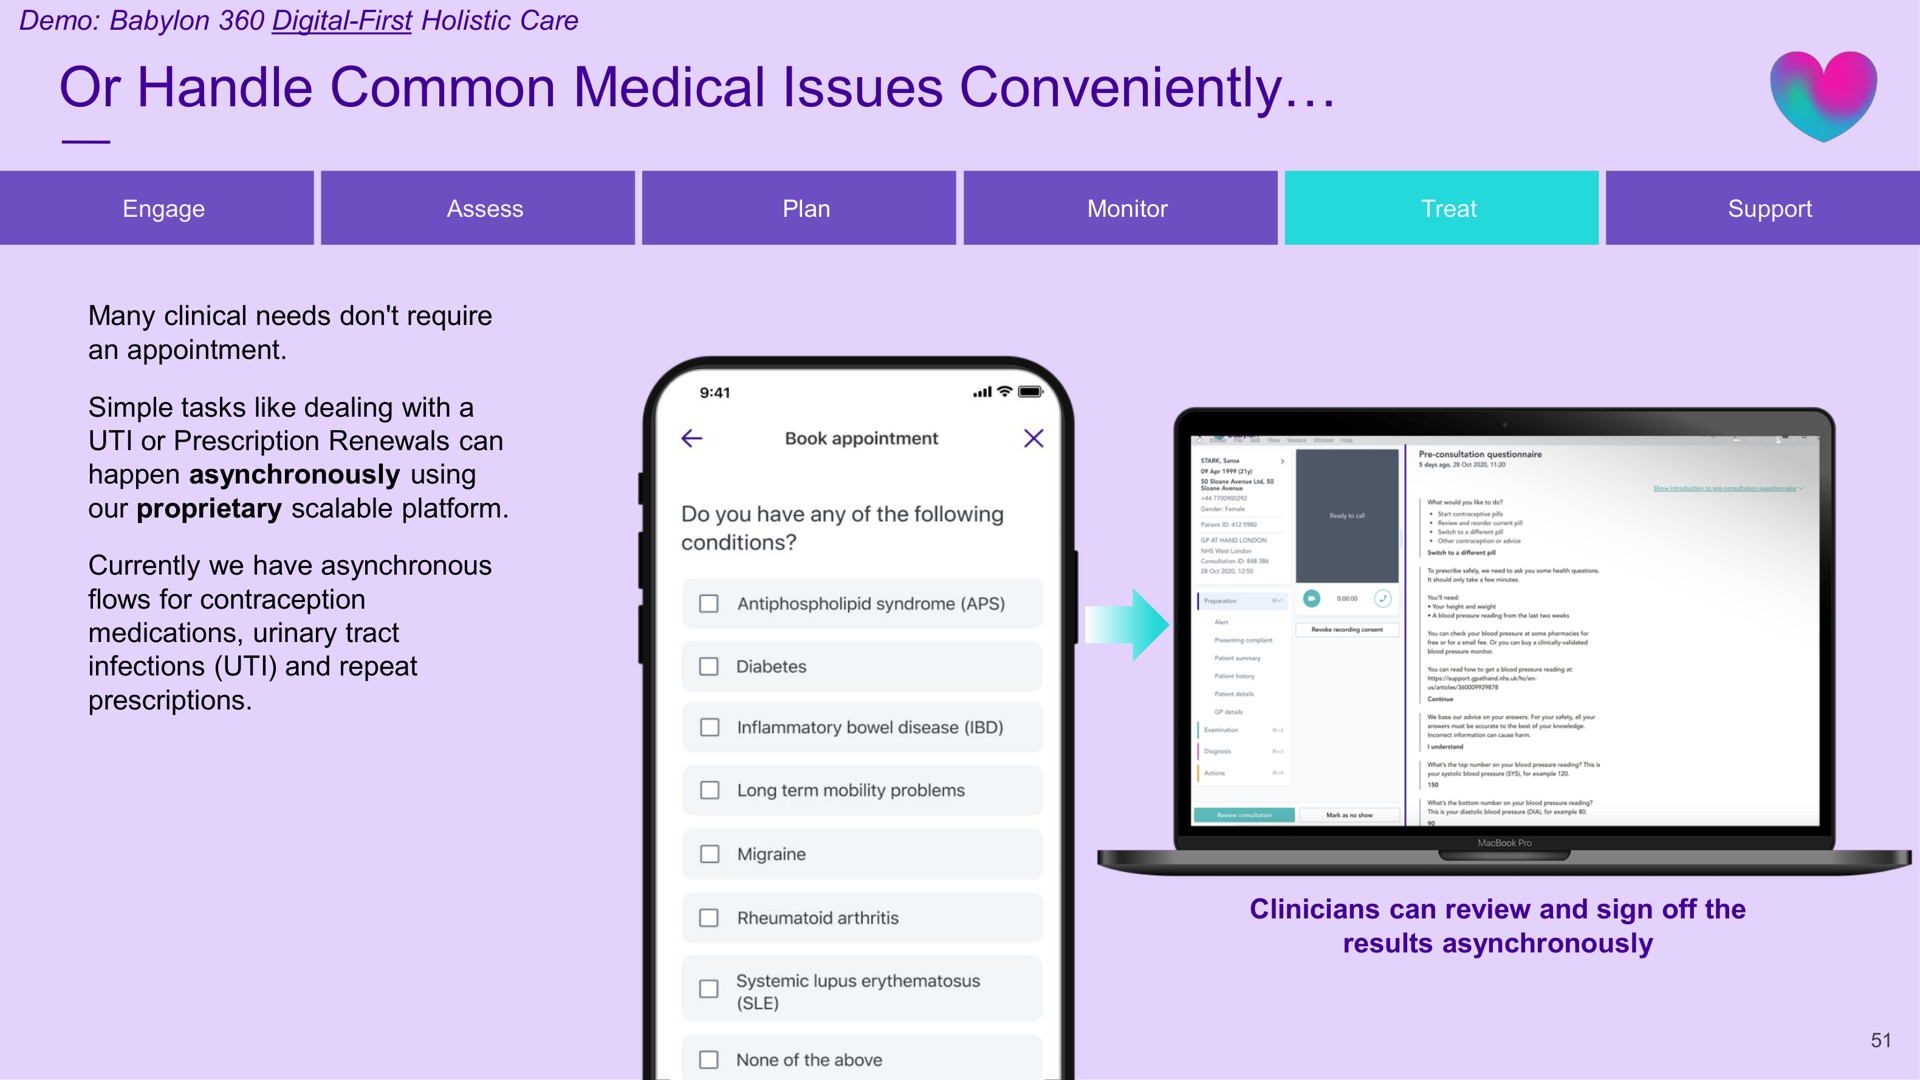 or handle common medical issues conveniently | Babylon